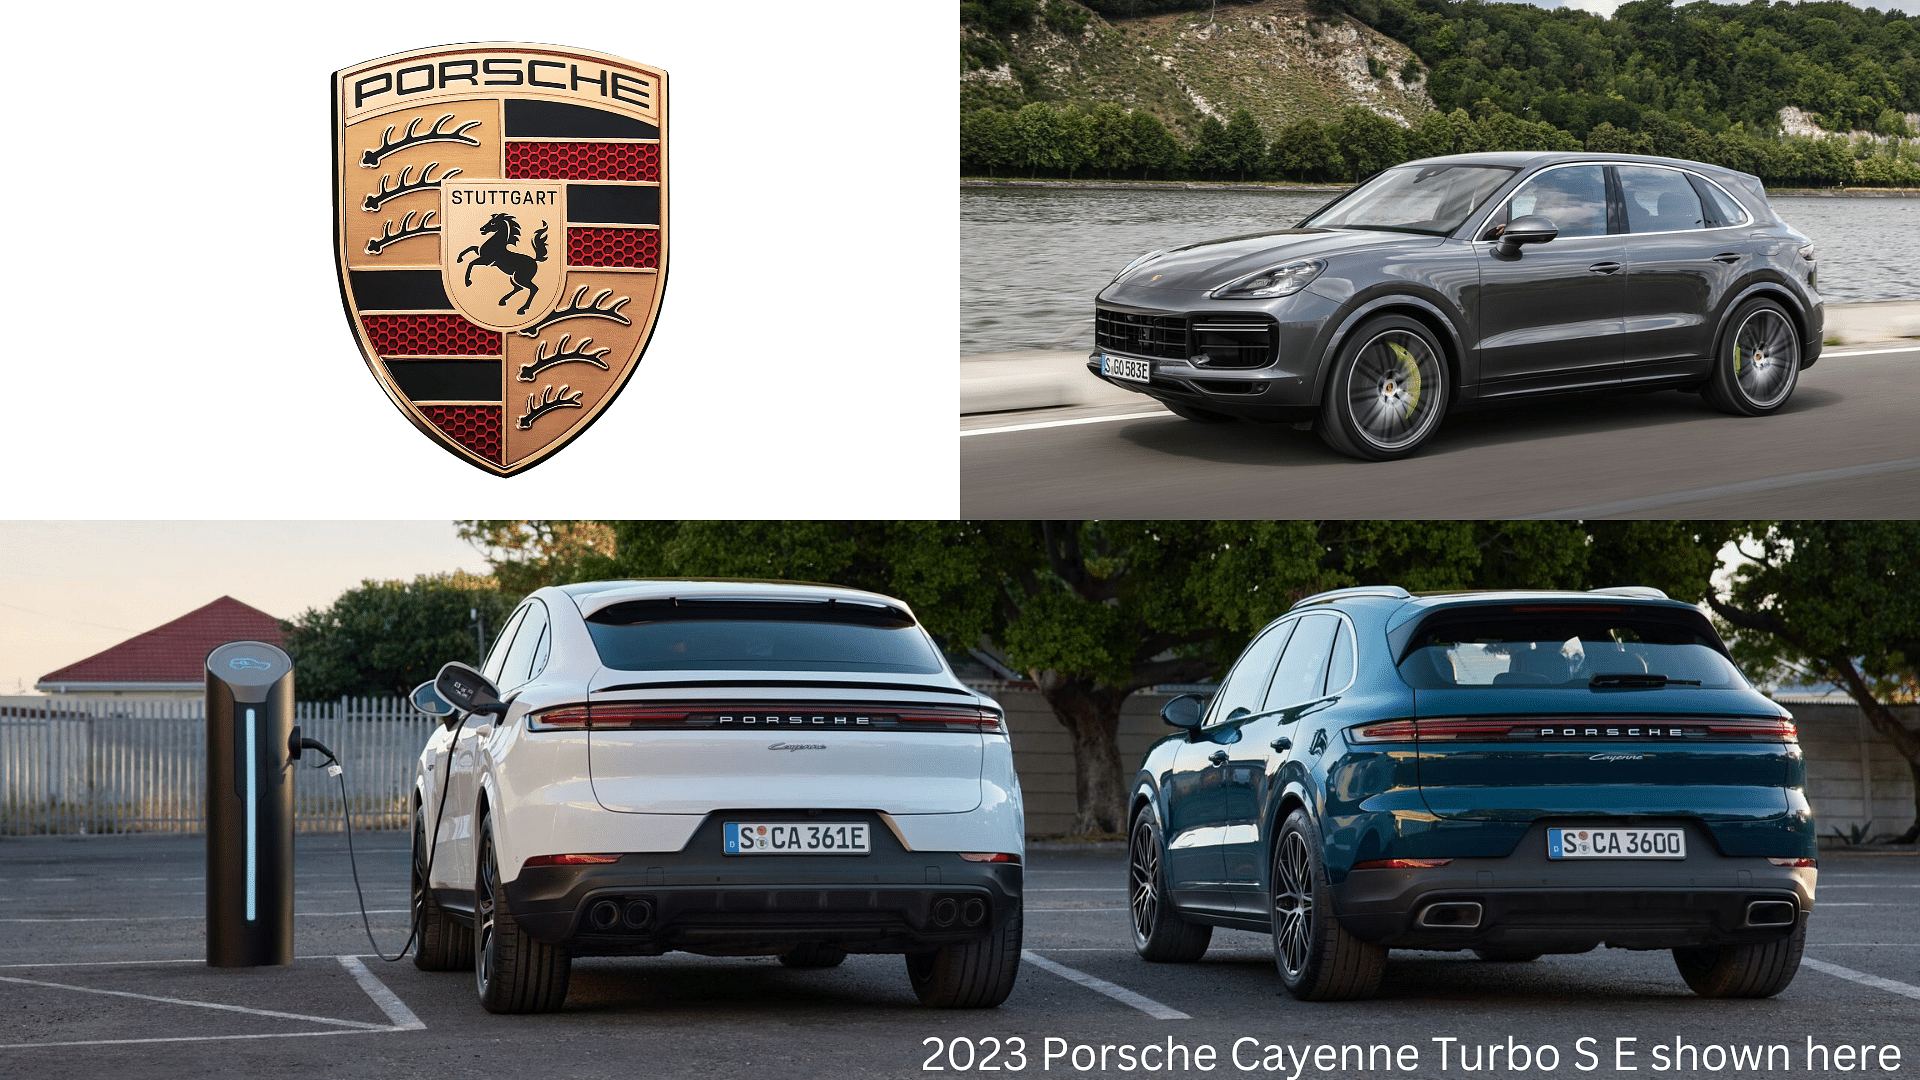 Hotter Porsche Cayenne Turbo Coupe Coming Soon With 631 Horsepower